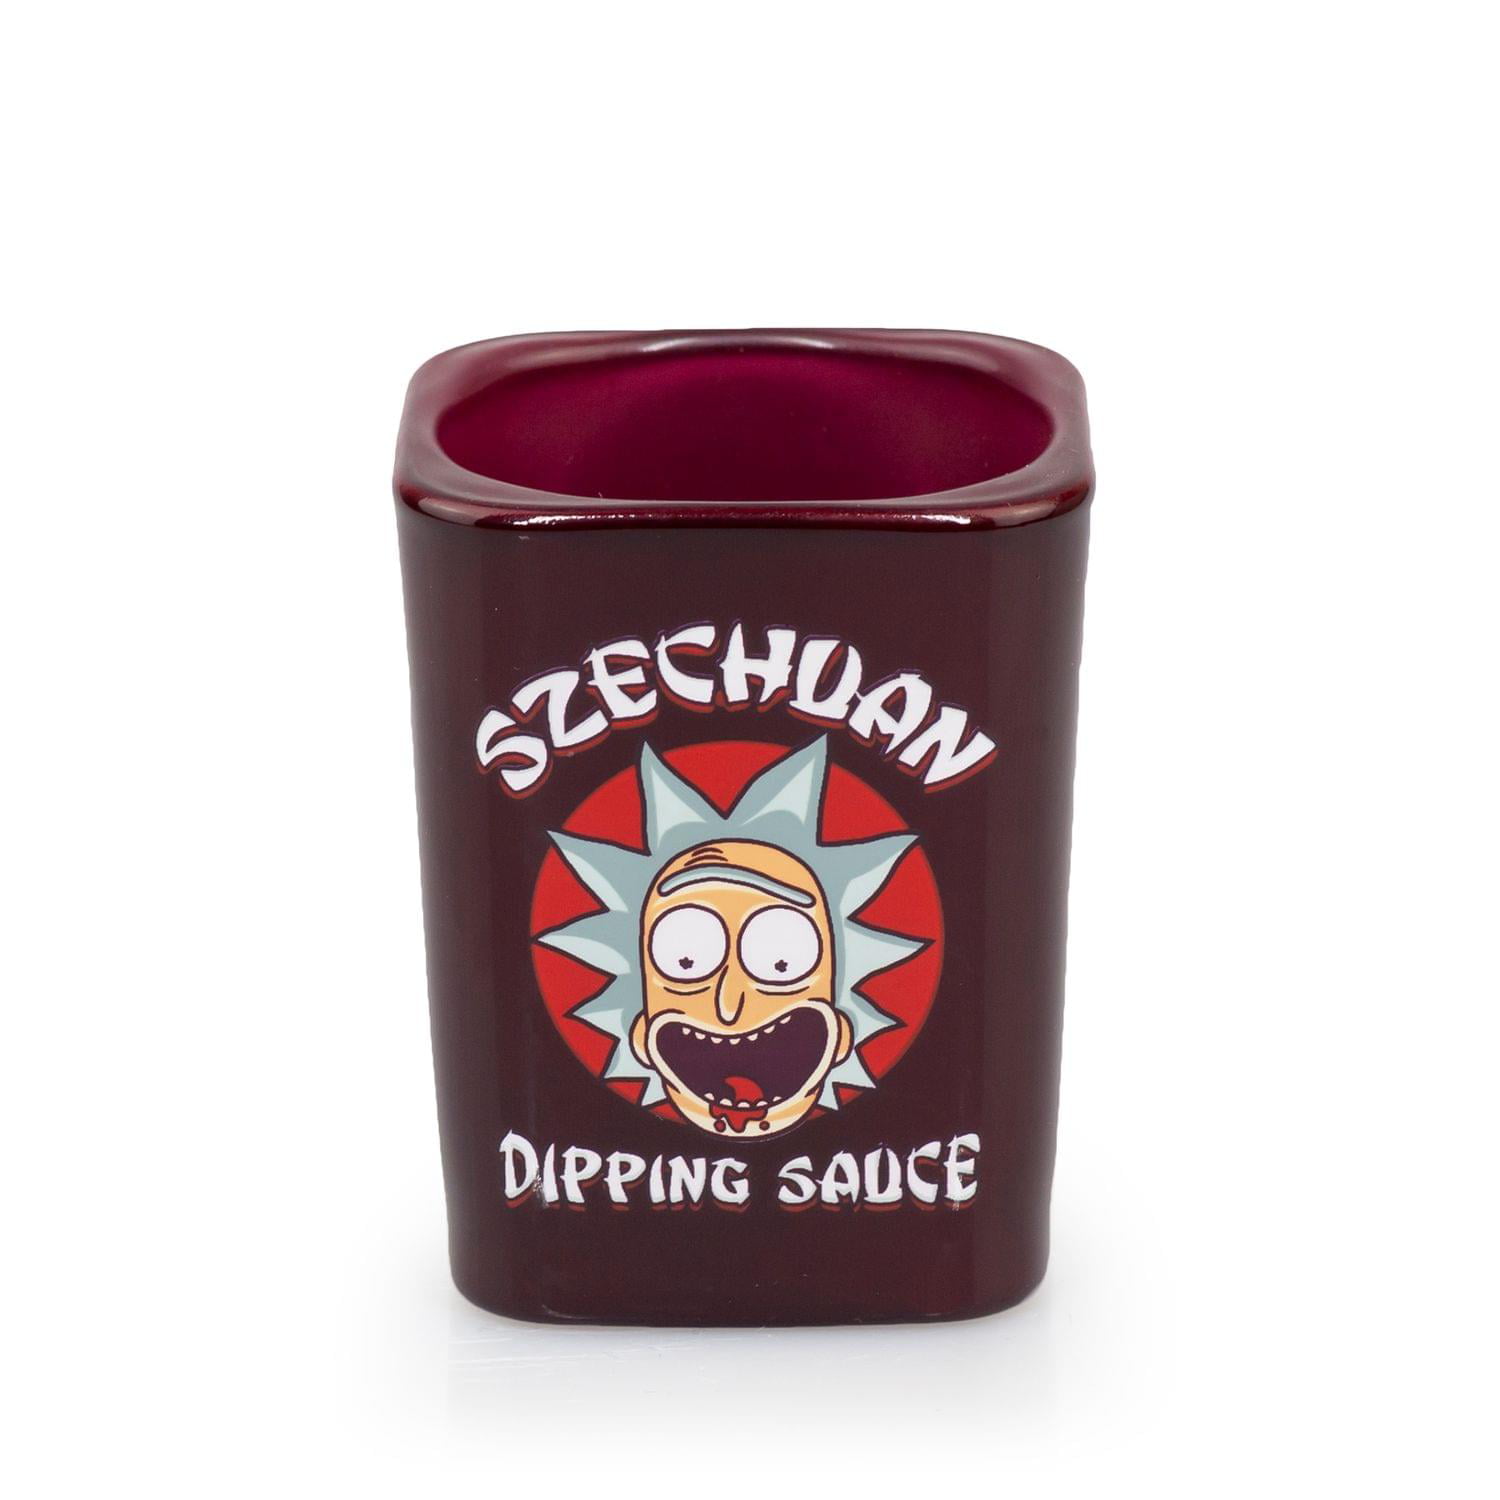 Rick and Morty Szechuan Dipping Sauce Shot Glass and Plastic Cup Bundle